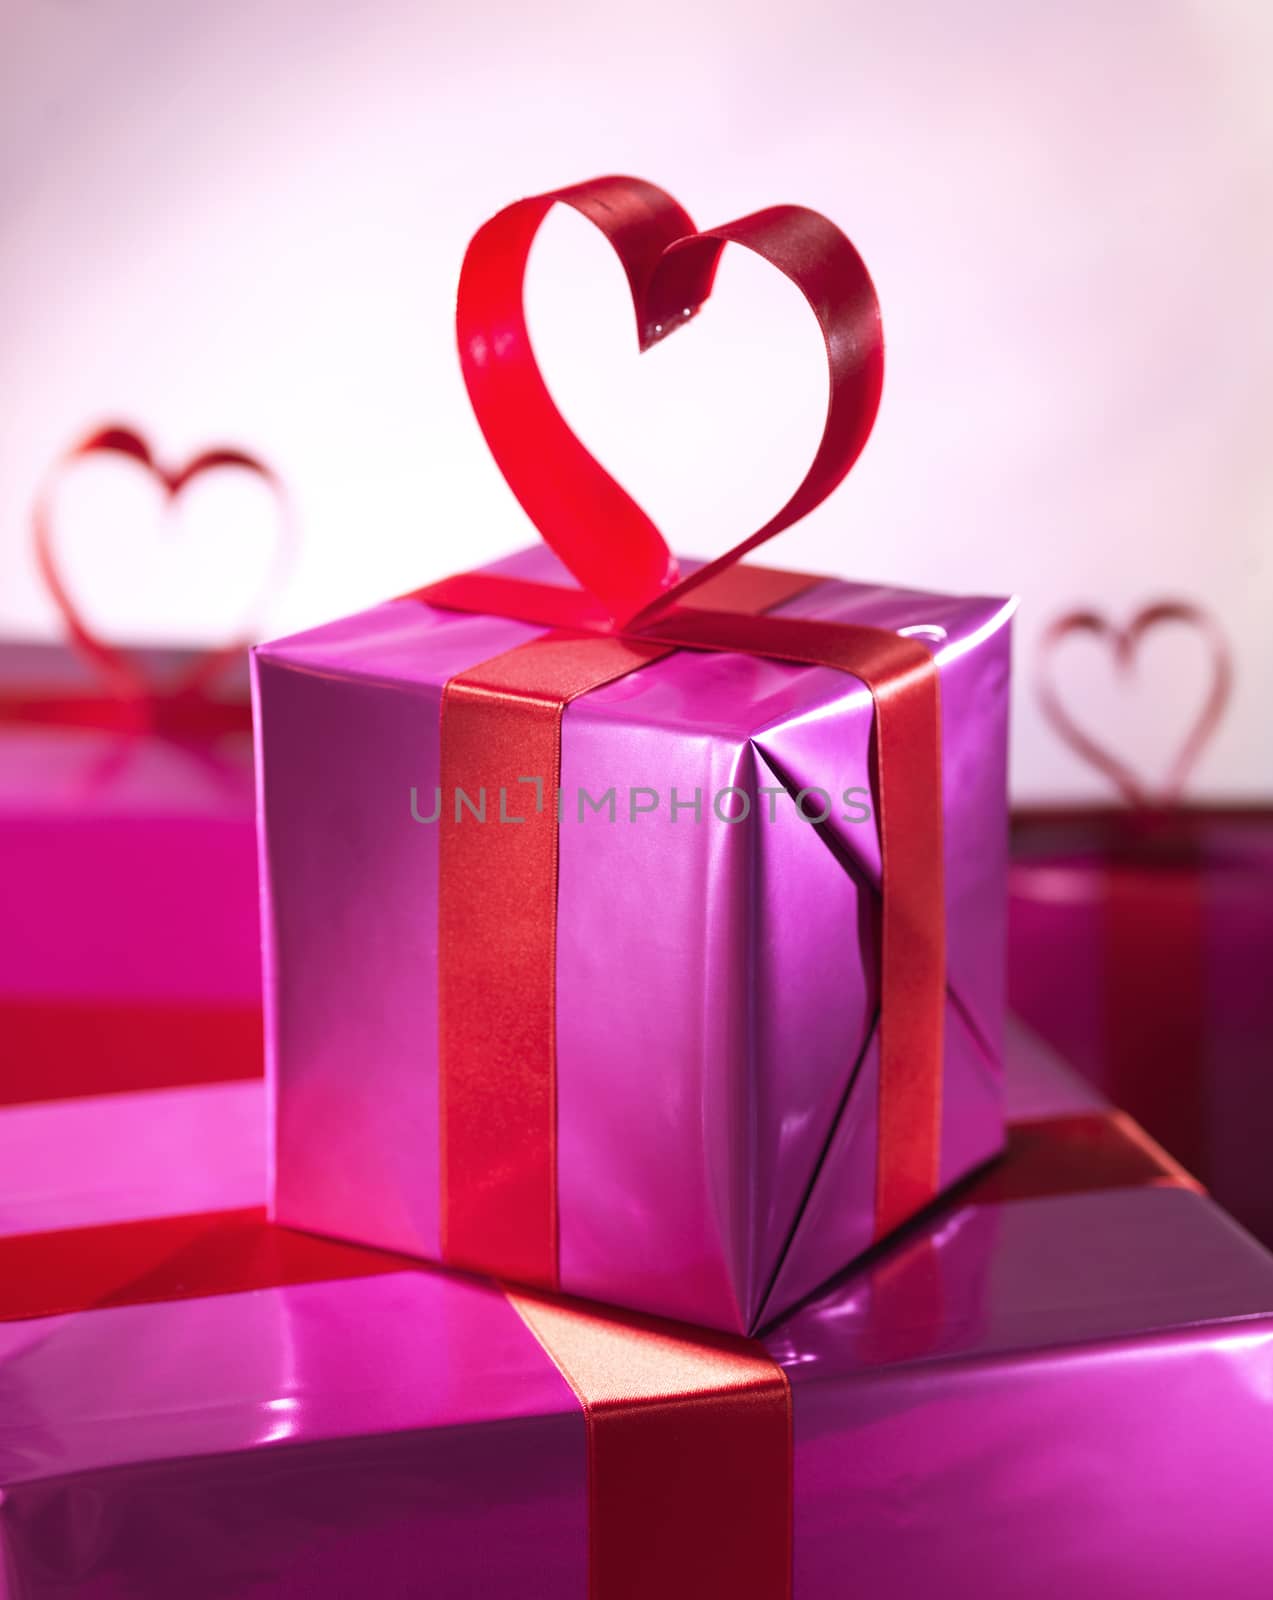 Red love heart gift box over red by janssenkruseproductions